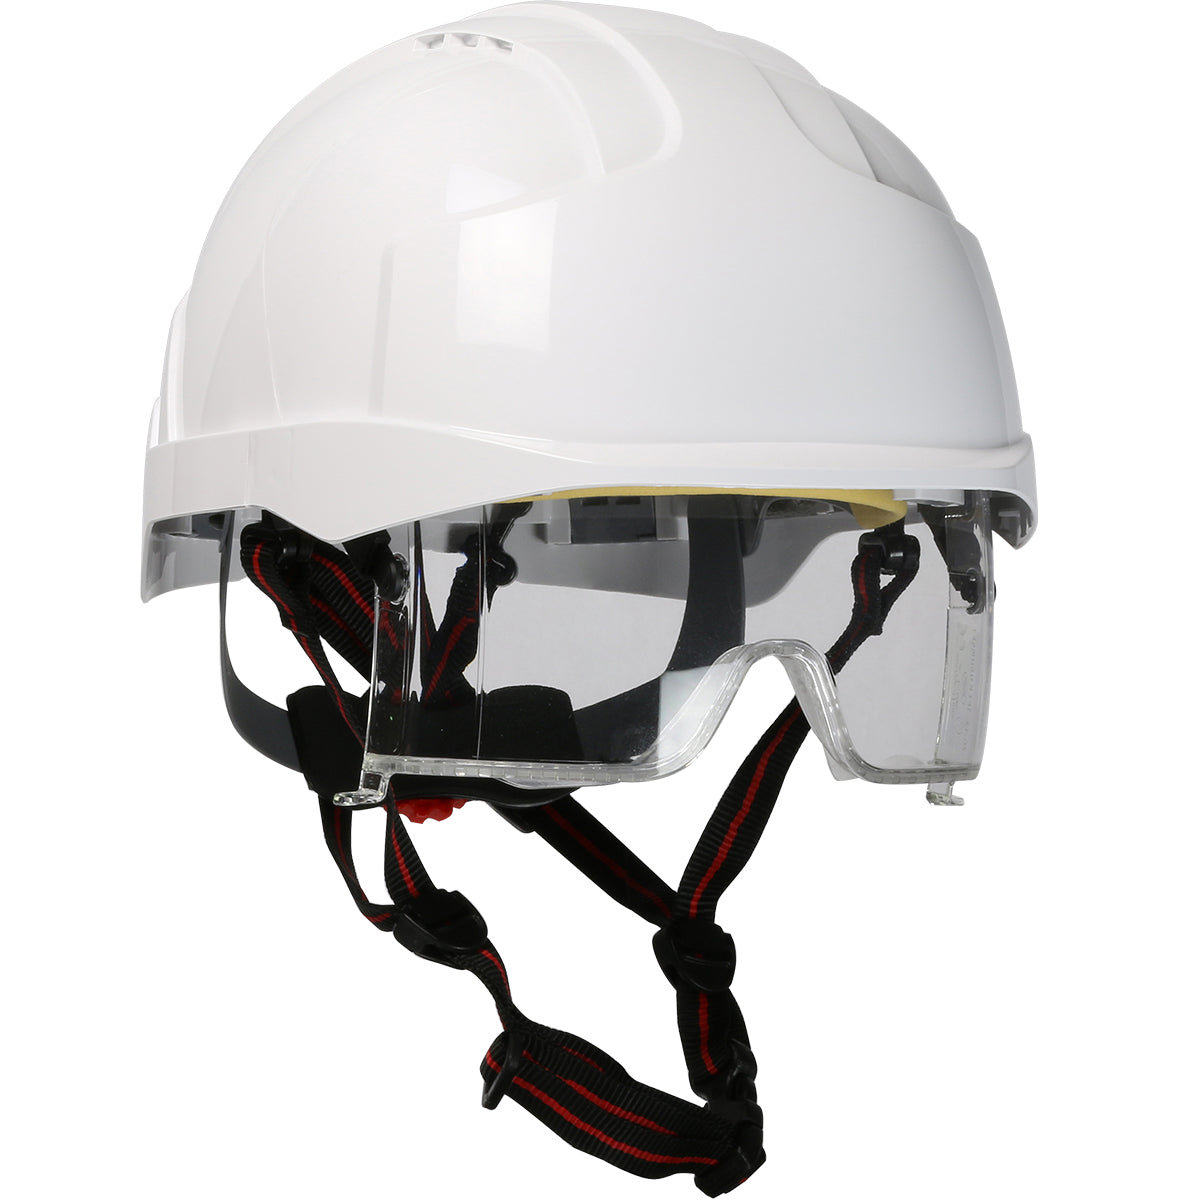 EVO® VISTA™ ASCEND™ Type I, Non-Vented Industrial Safety Helmet with fully adjustable four point chinstrap, Lightweight ABS Shell, Integrated ANSI Z87.1 Eye Protection, 6-Point Polyester Suspension and Wheel Ratchet Adjustment